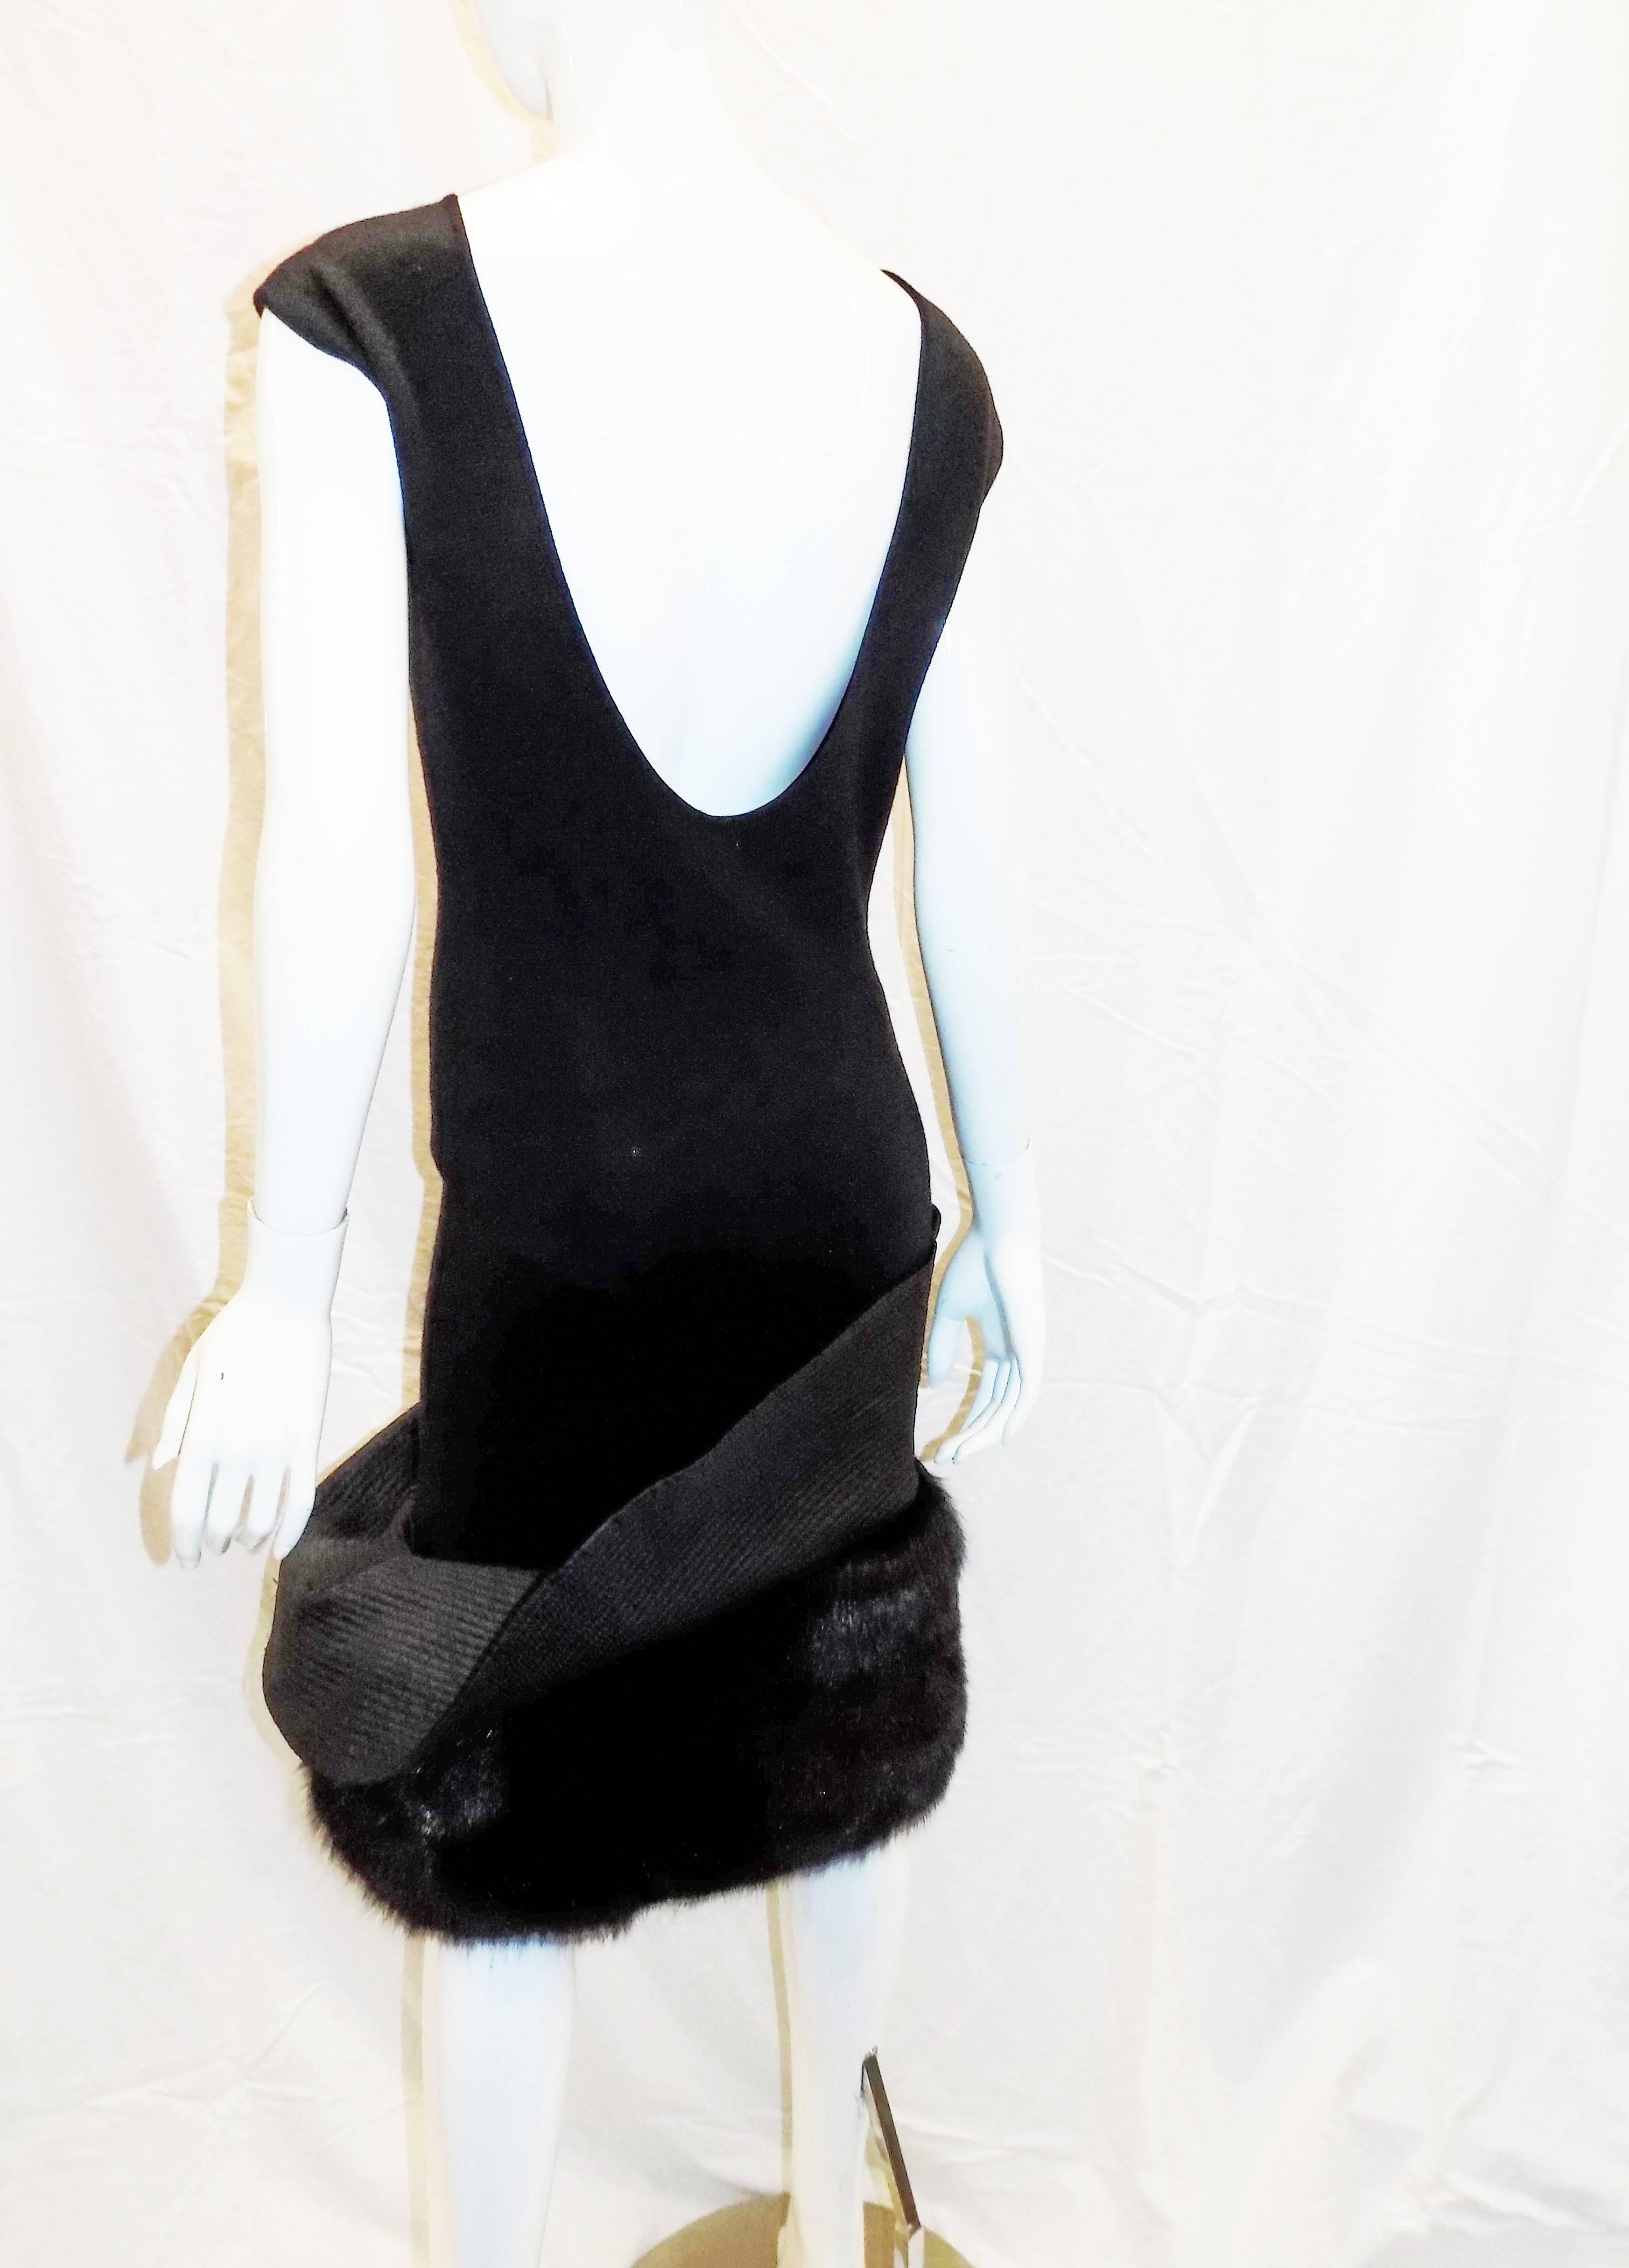 Gianfranco Ferre Vintage black knit cocktail dress with fox Fur trim In Excellent Condition For Sale In New York, NY